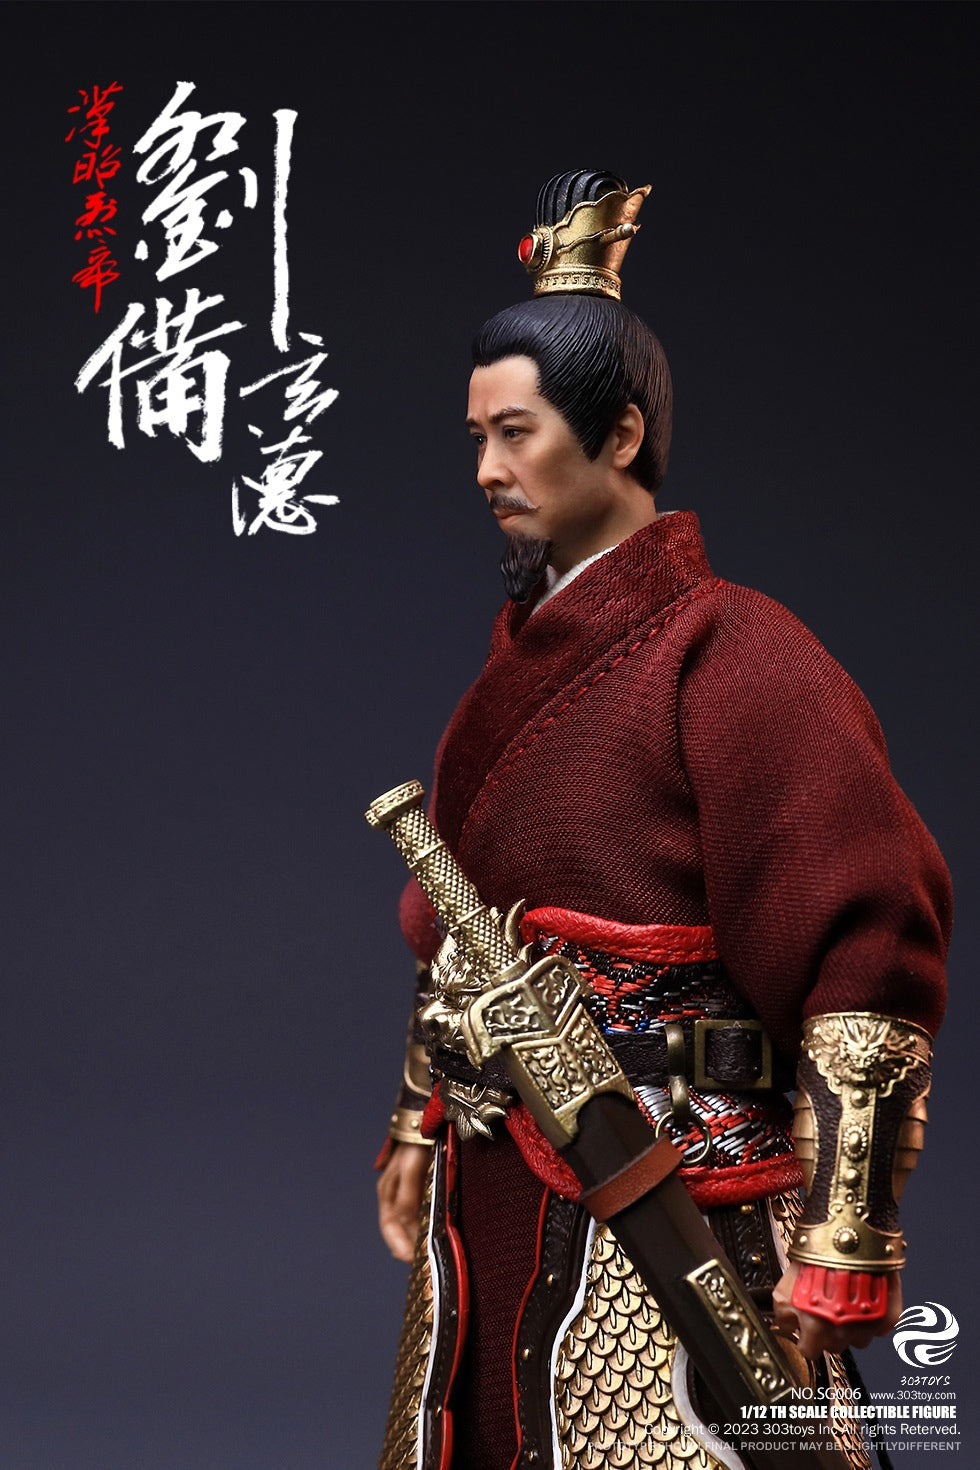 303 Toys - SG006 - Three Kingdoms on Palm Series - The Five Tiger Generals 五虎上將 - Liu Bei (Xuande) 劉備 (玄德) -漢昭烈帝- (Deluxe Ver.) (1/12 Scale) - Marvelous Toys